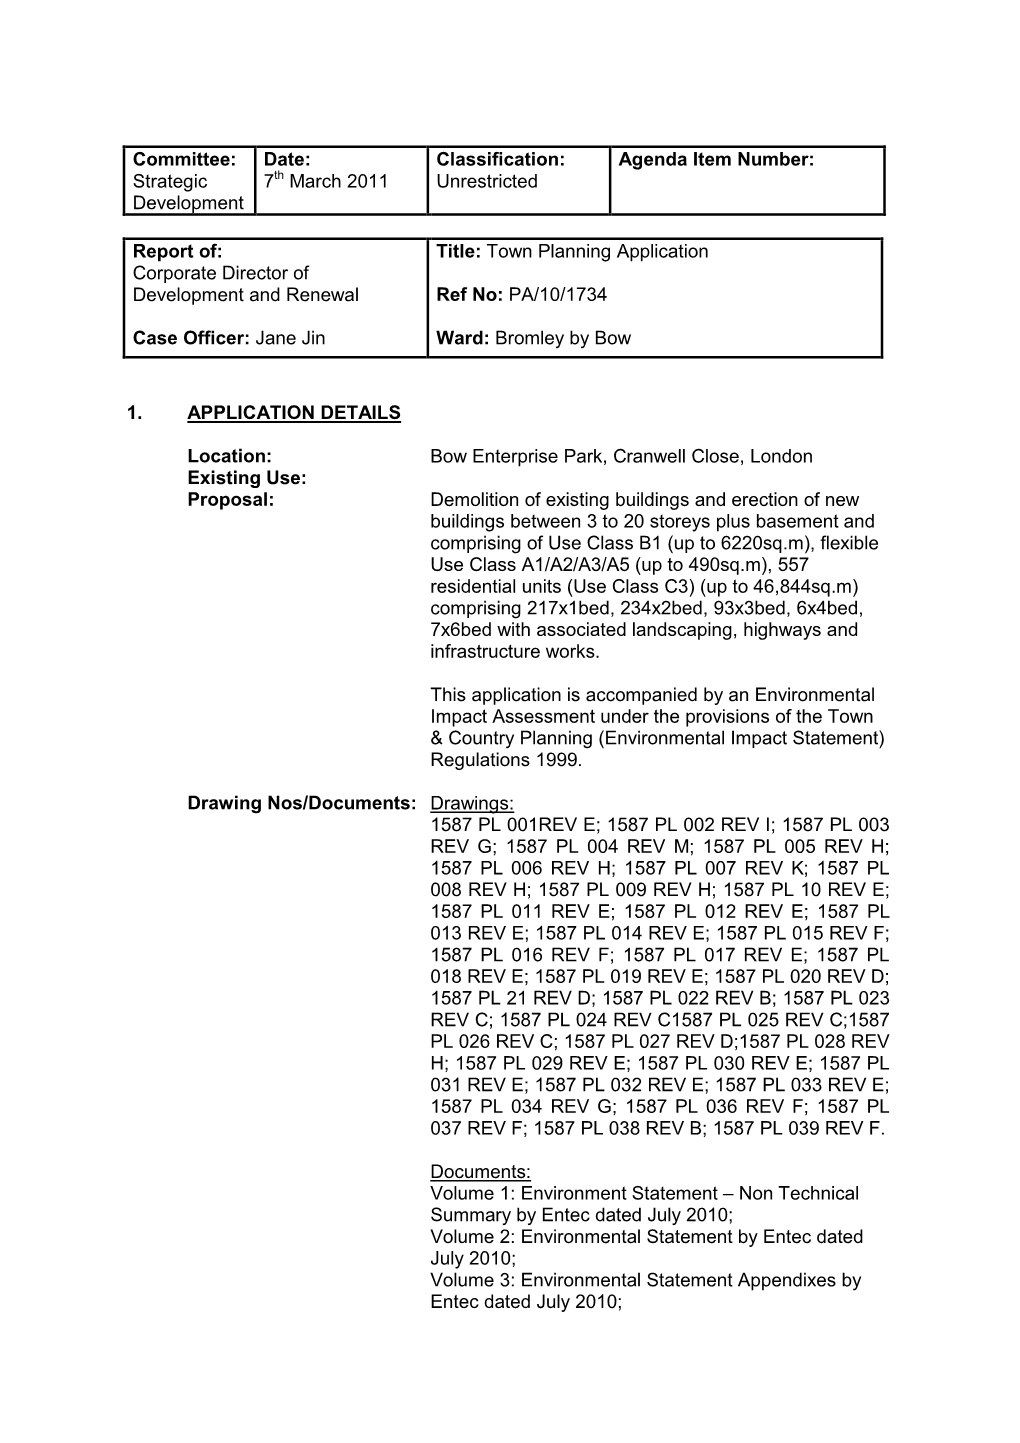 Report Of: Title: Town Planning Application Corporate Director of Development and Renewal Ref No: PA/10/1734